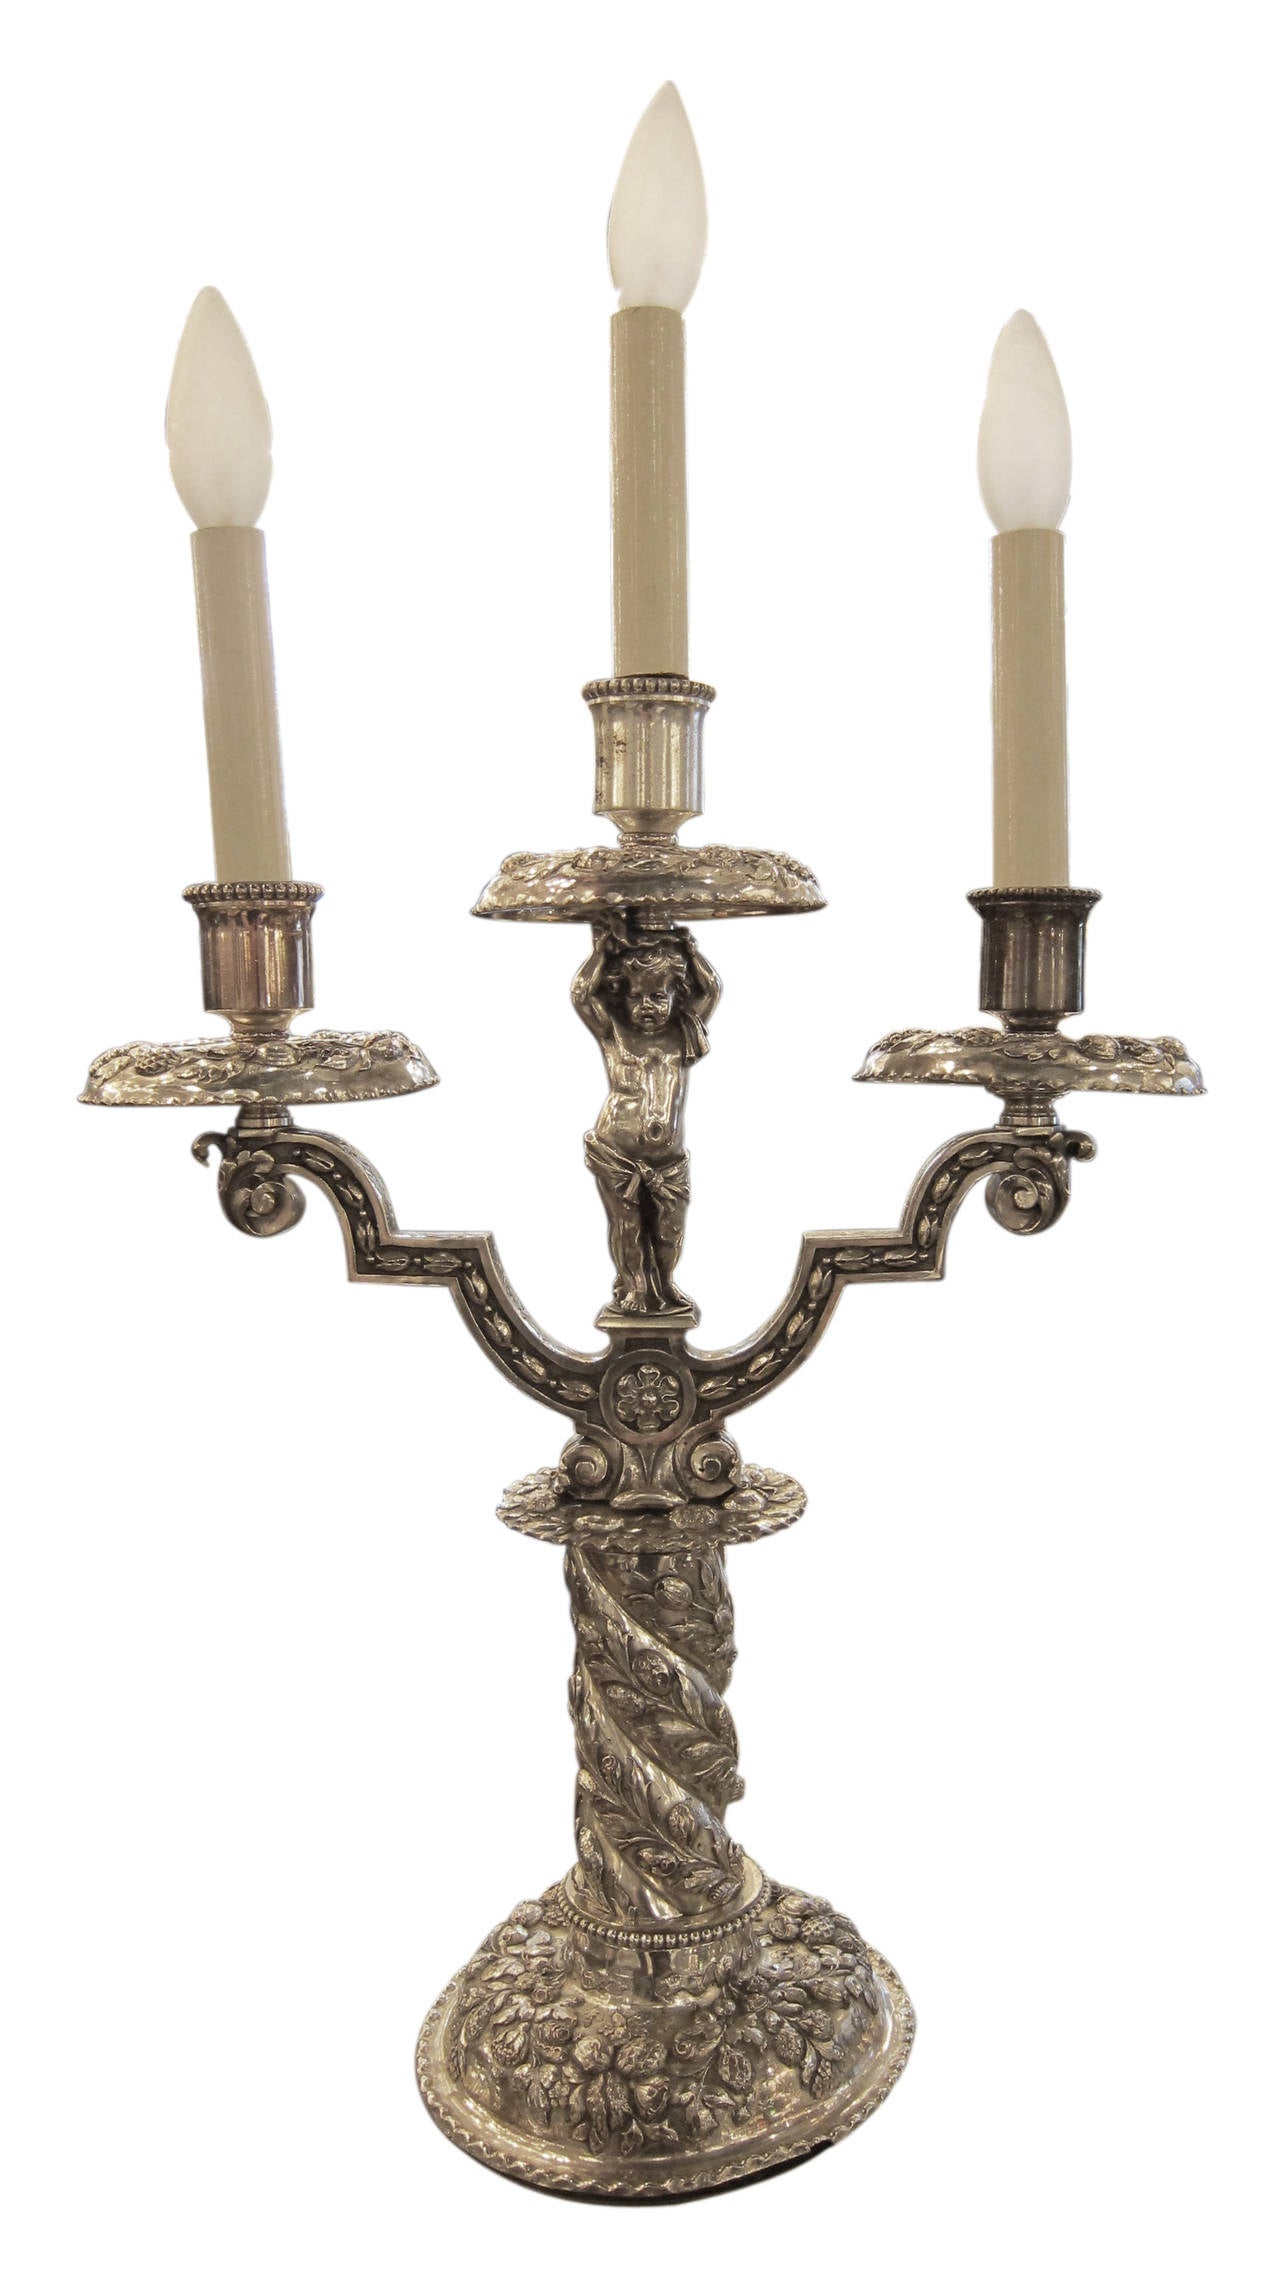 1900s pair silvered bronze table candelabrum with opposing cherubs made by  EF Caldwell. One lamp is slightly bent at base. This can be seen at our 2420 Broadway location on the upper west side in Manhattan.